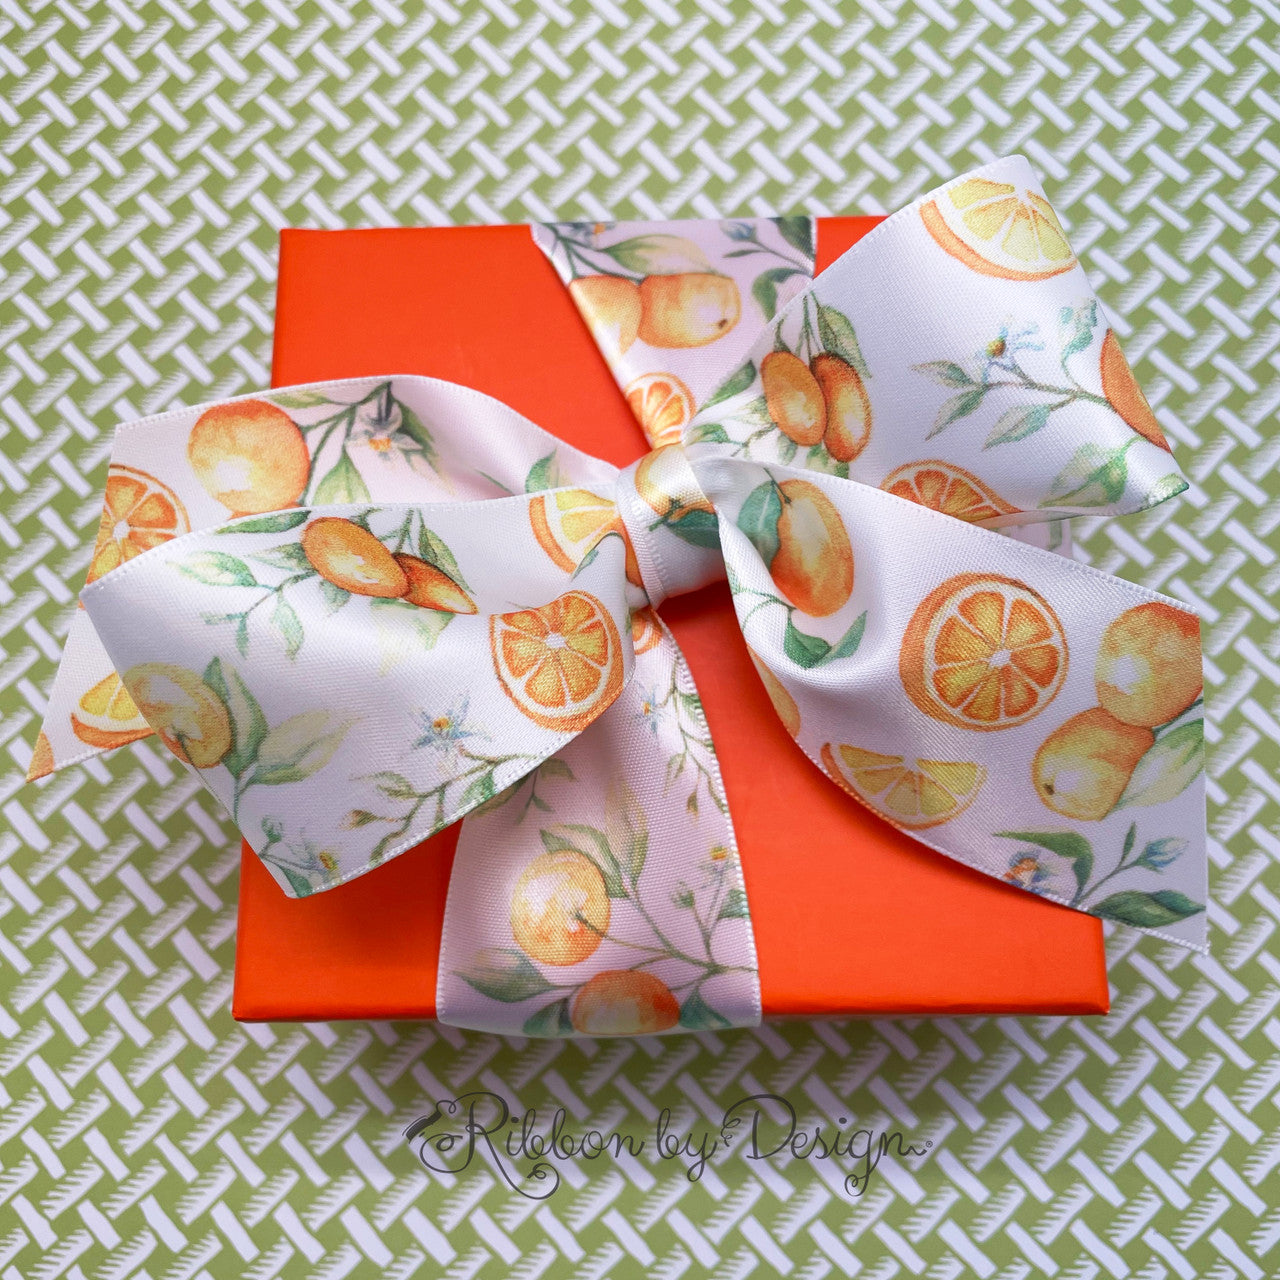 Our oranges ribbon makes a beautiful bow for gifts for any occasion!